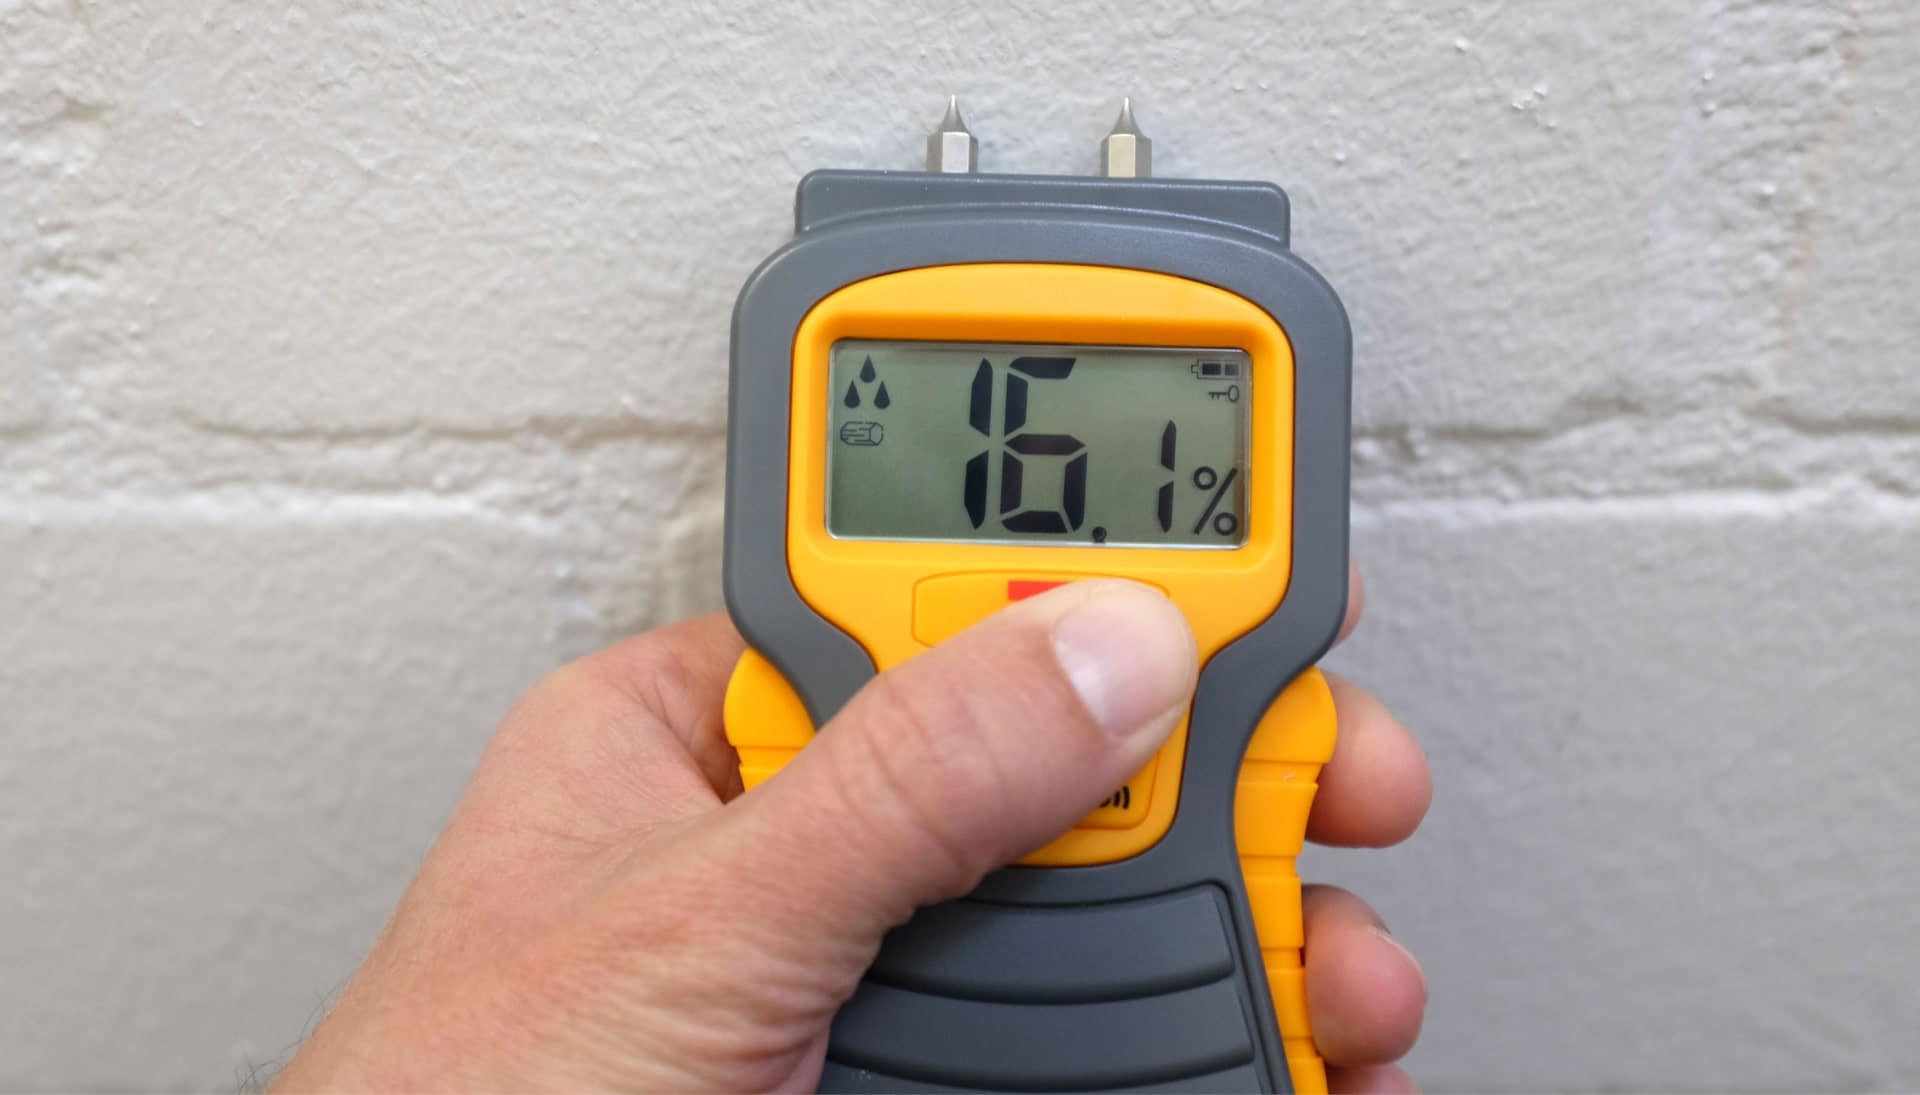 We provide fast, accurate, and affordable mold testing services in Bowie, Maryland.